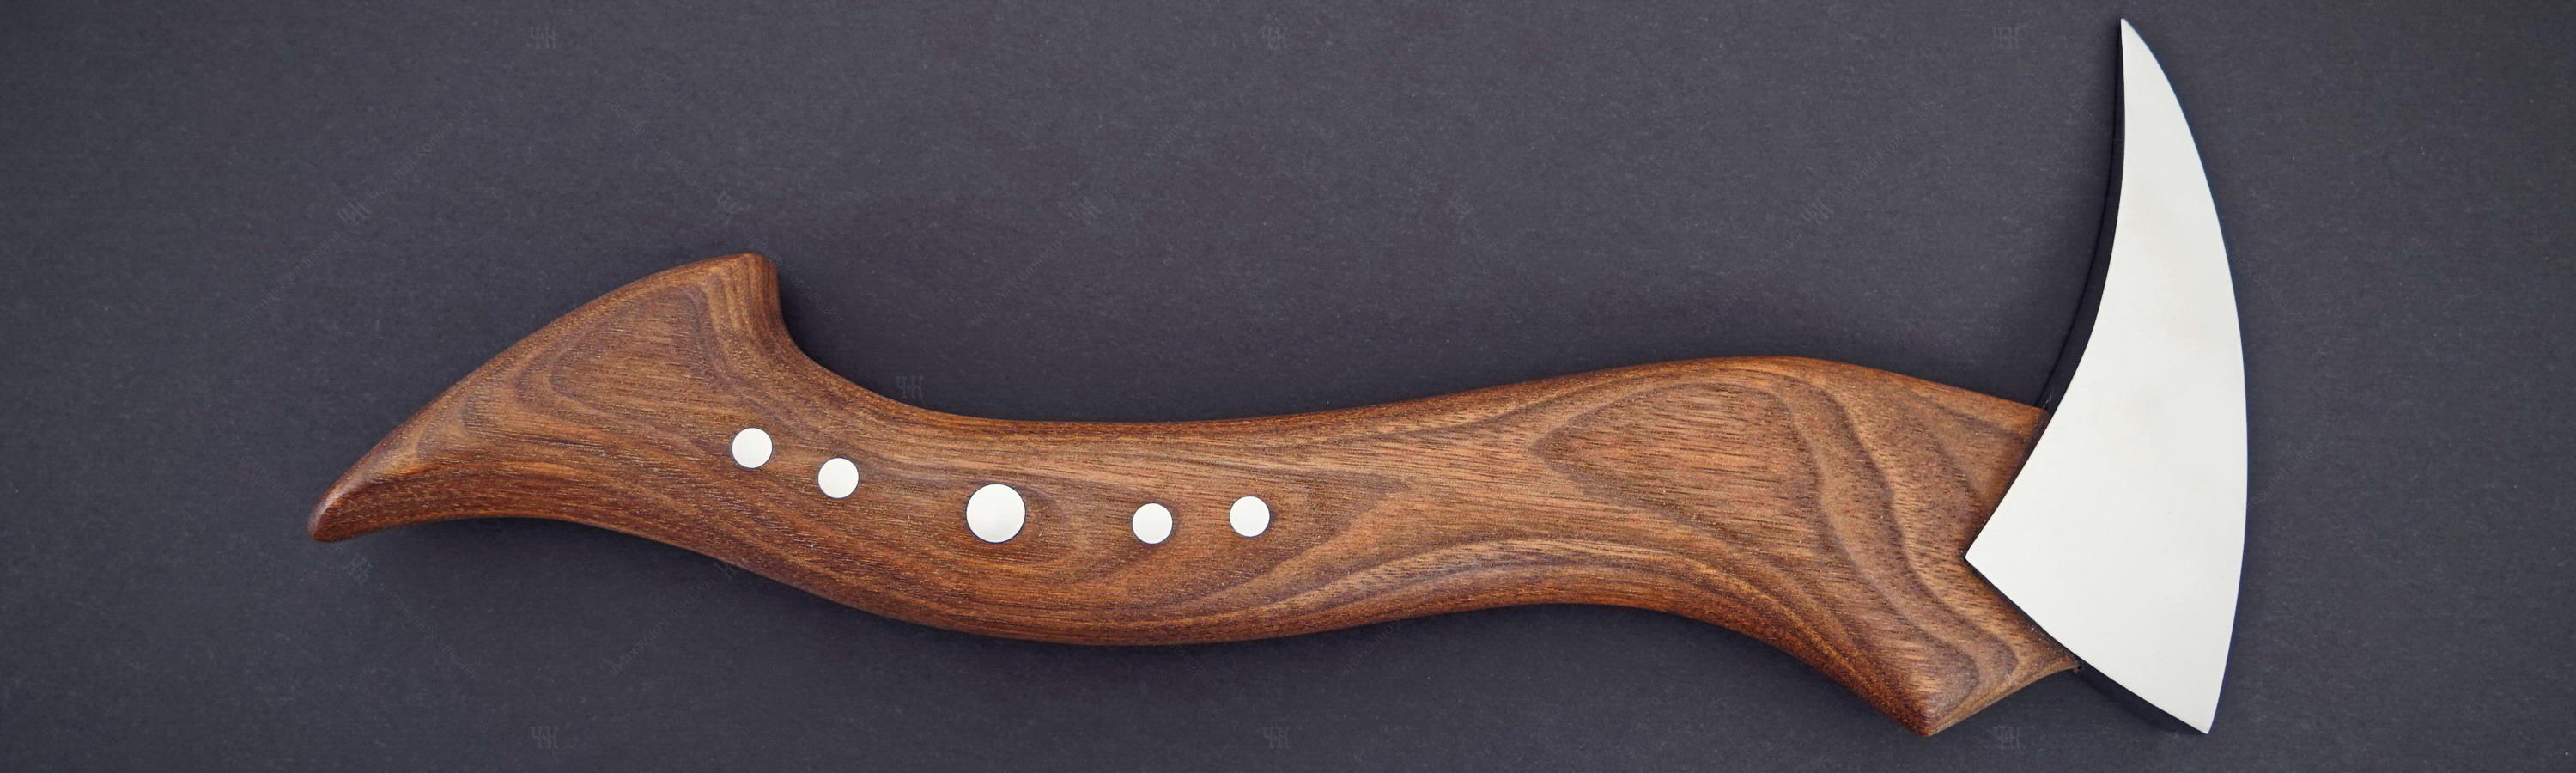 Axe from valuable wood